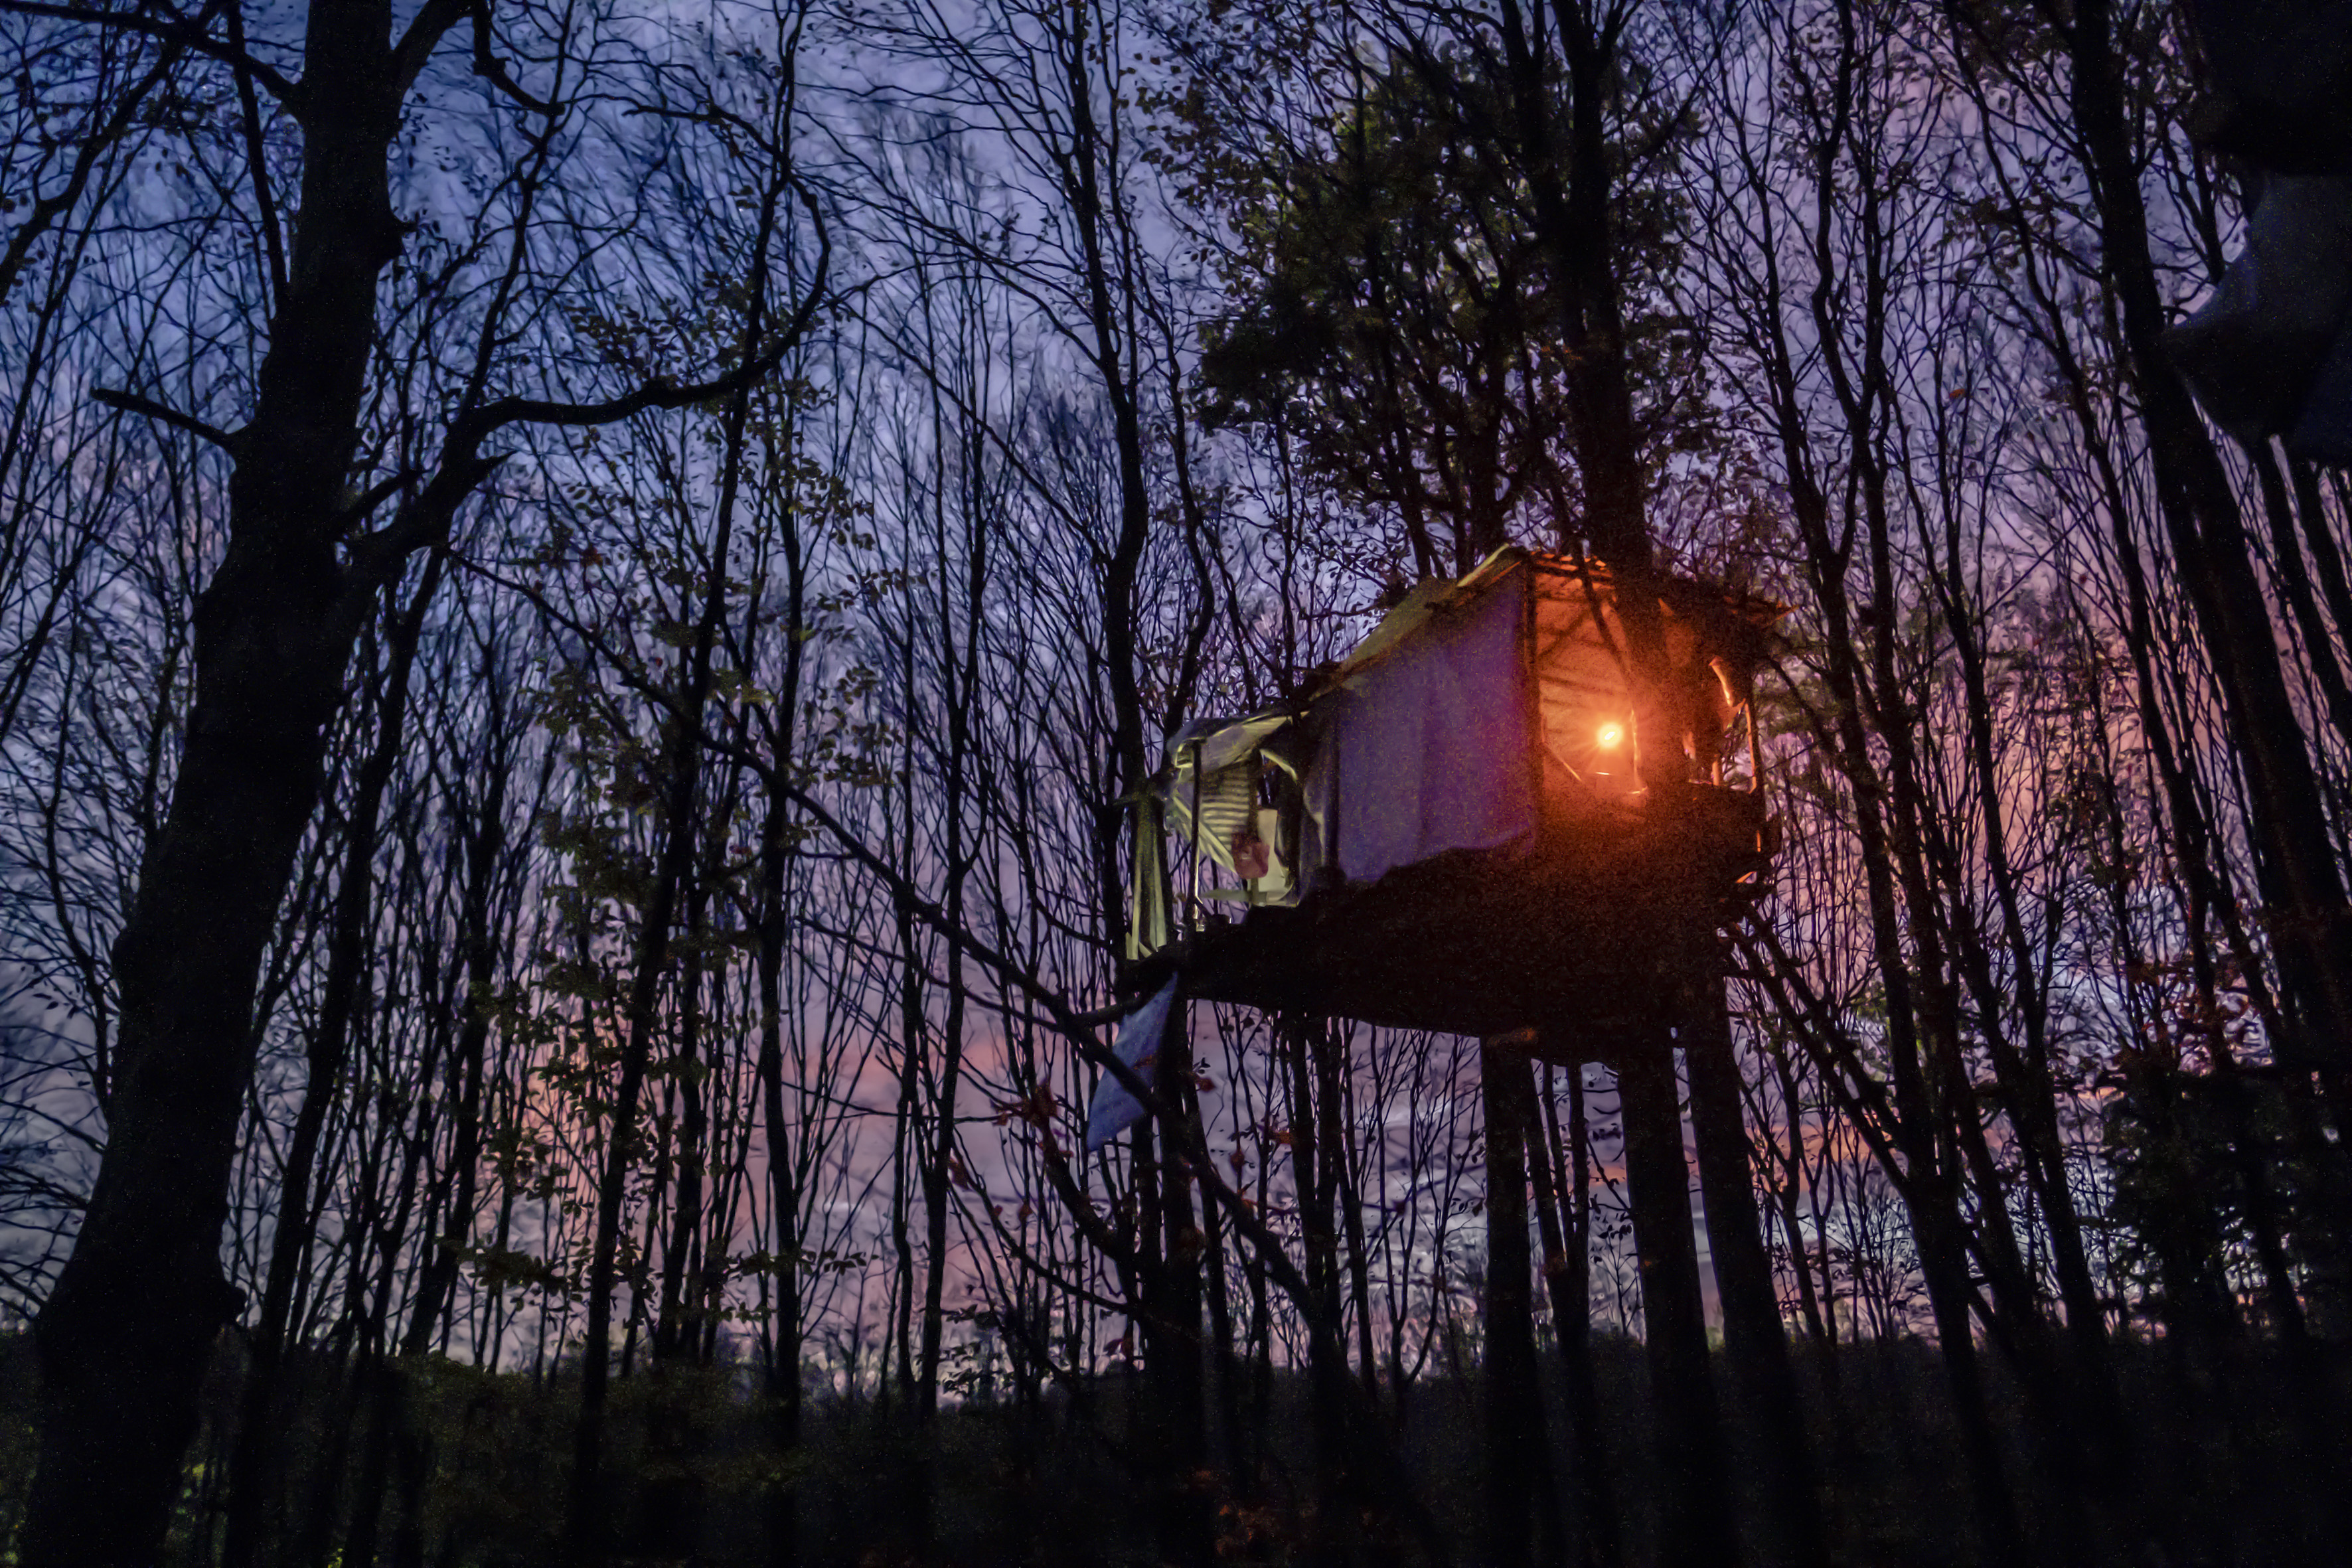 A treehouse surrounded by thin trees at sunset, from David Klammer's “Barricade”. Photo courtesy of DOK Leipzig. 